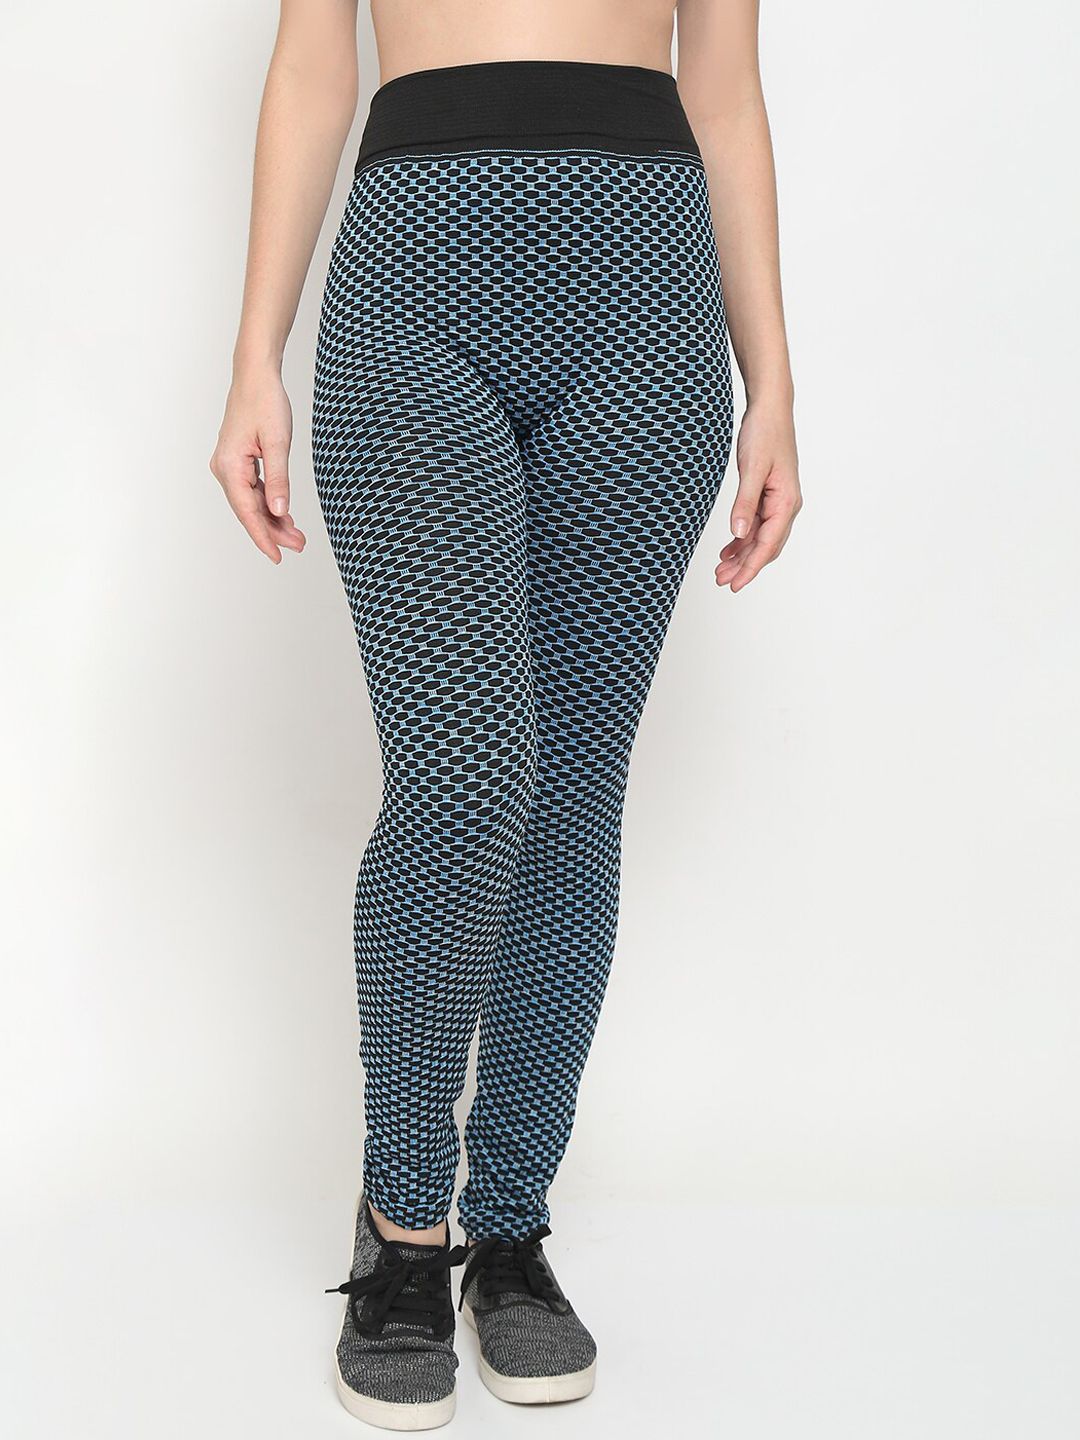 GRACIT Women Blue Printed Tights Price in India